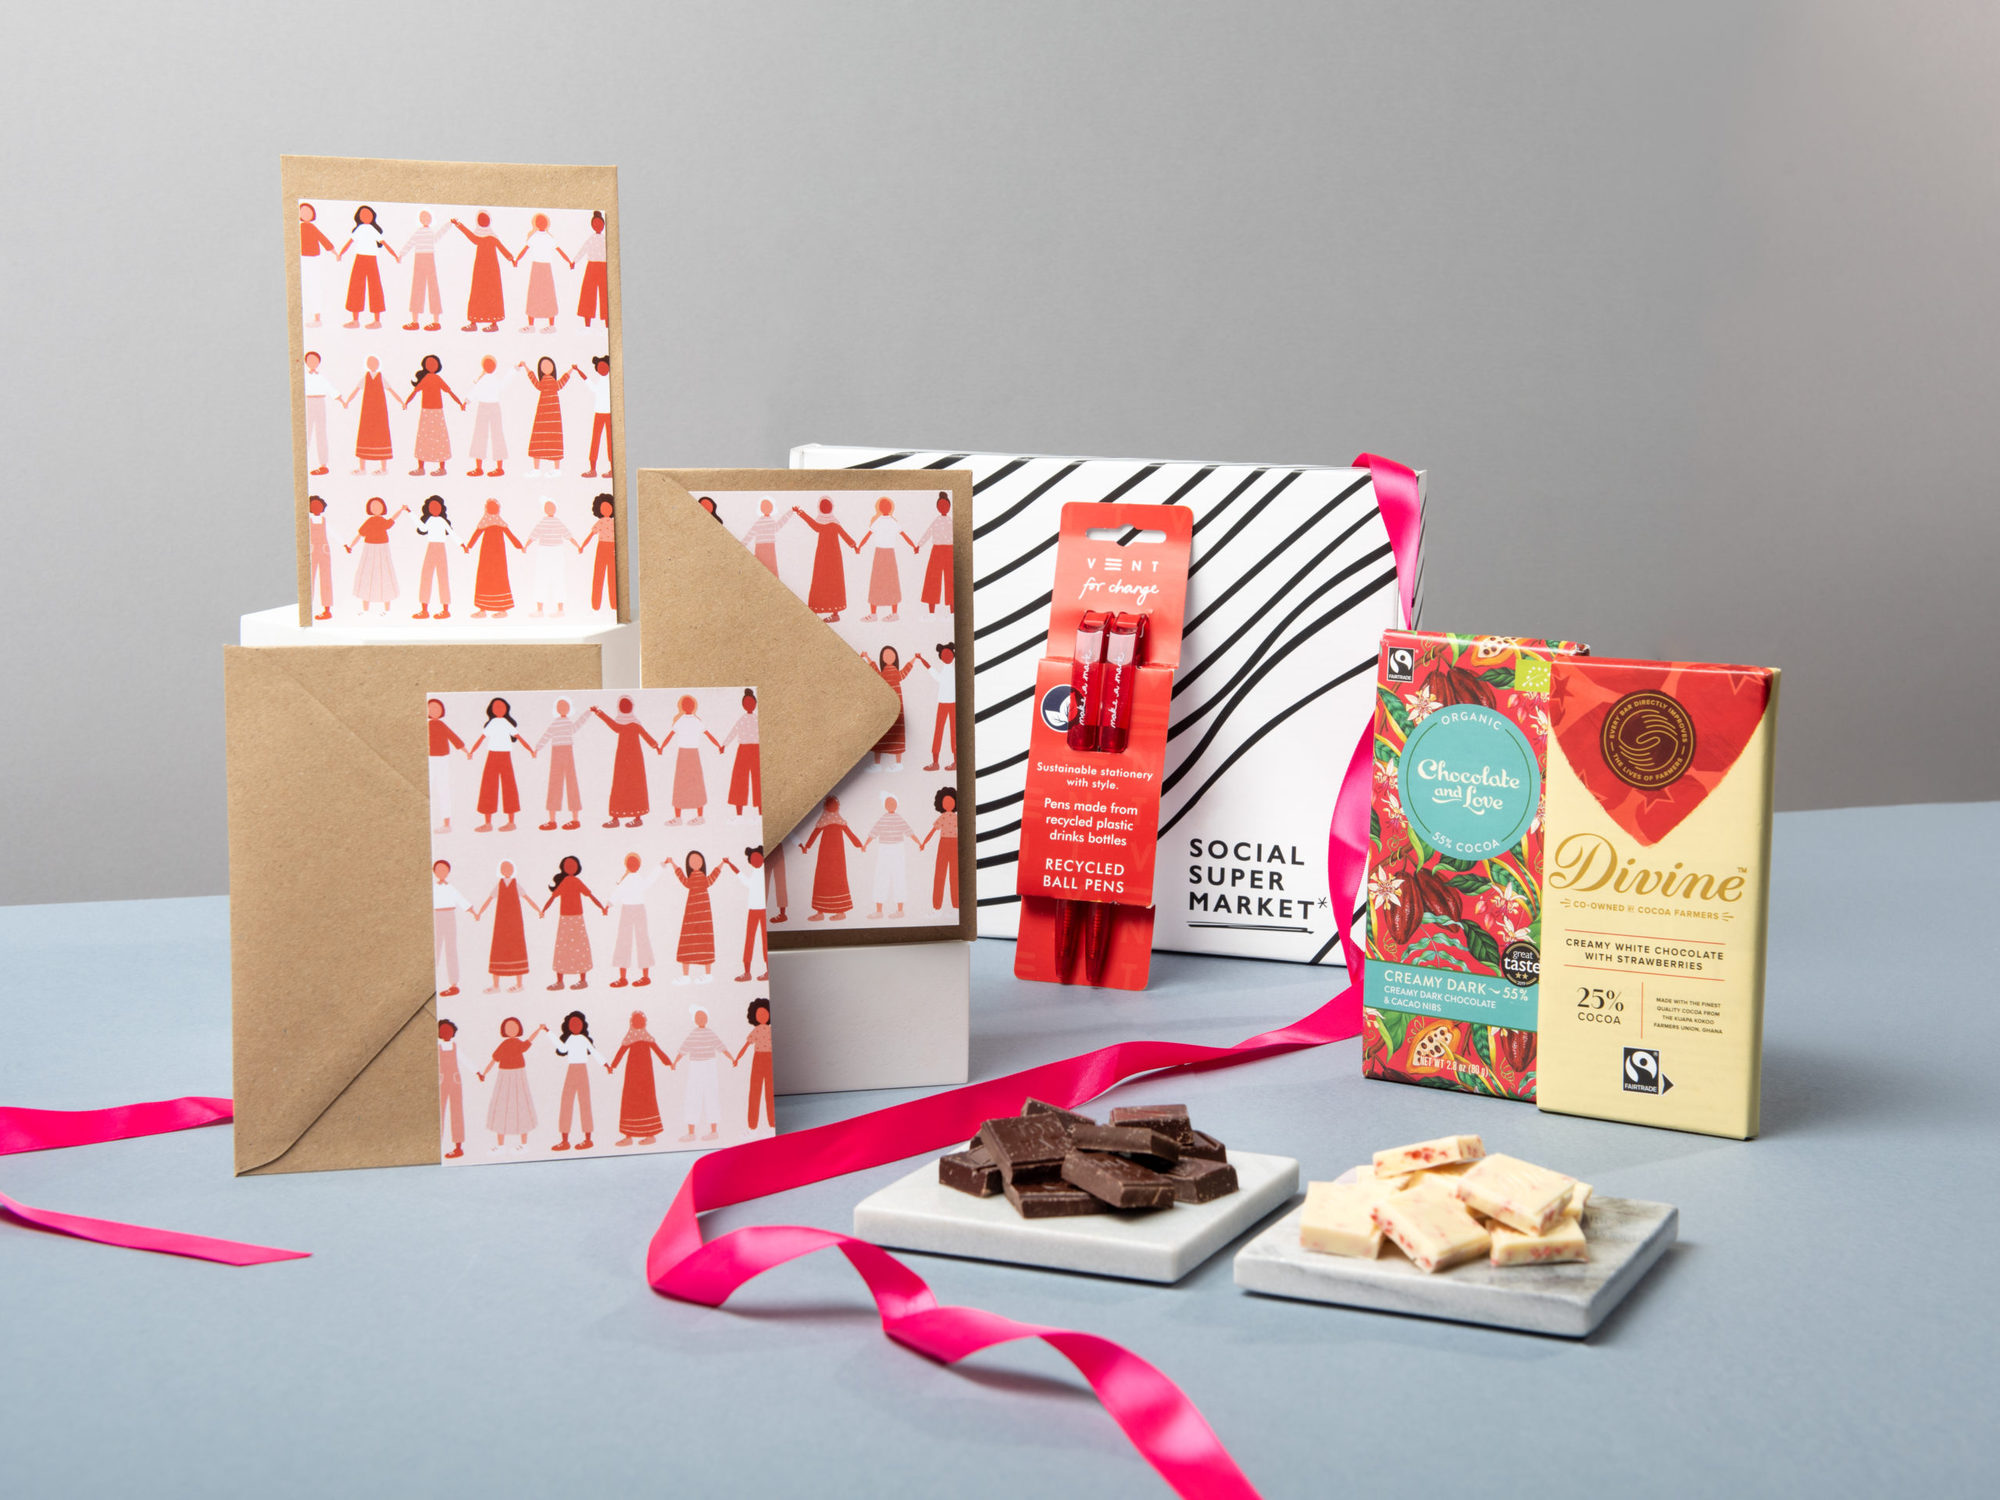 The Valentine's Day Pen Pal Letterbox Gift  with its contents surrounding the box they come in – including a Hip Hip Hooray notecard set, VENT For Change recycled red pens, Divine Chocolate and Chocolate and Love chocolate bars. They're surrounded by draped hot pink ribbon.